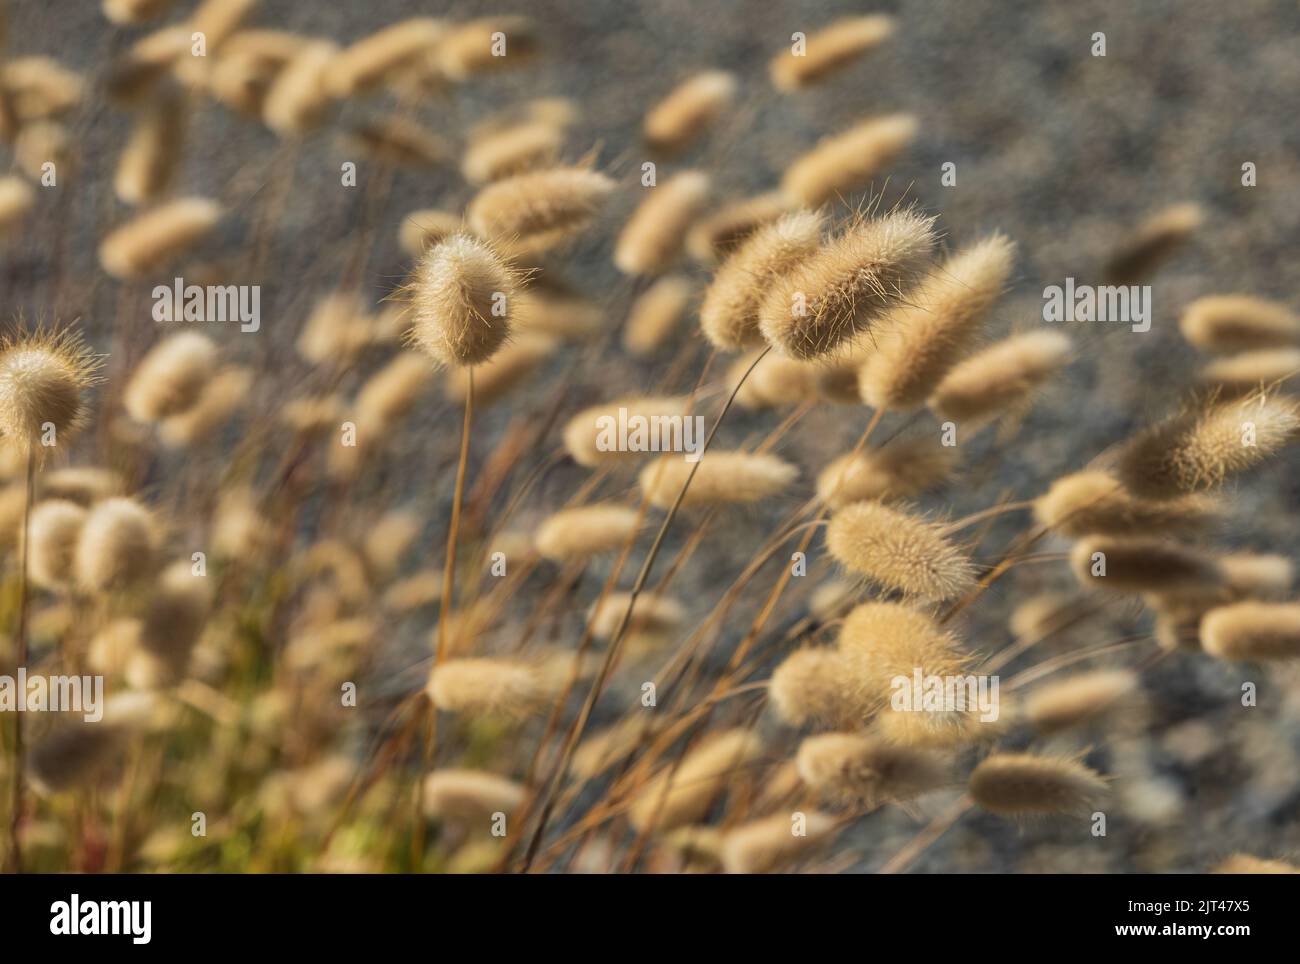 Bunnytail, hare's-tail, hare's-tail grass, Lagurus ovatus, Australian wild plant in natural outdoor environment fills the frame, selective foreground Stock Photo